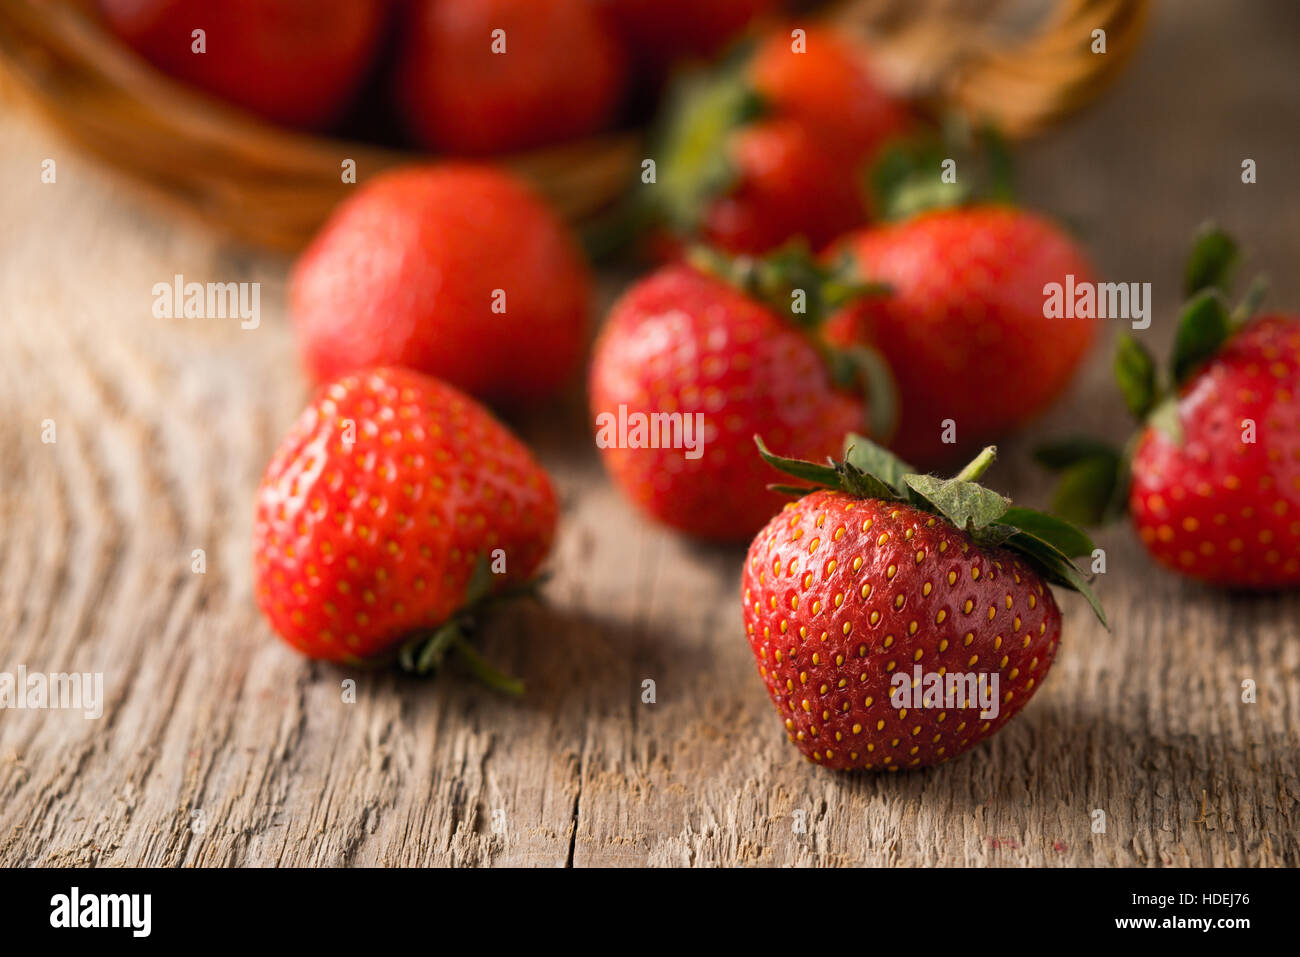 Strawberry  on the wooden table Stock Photo